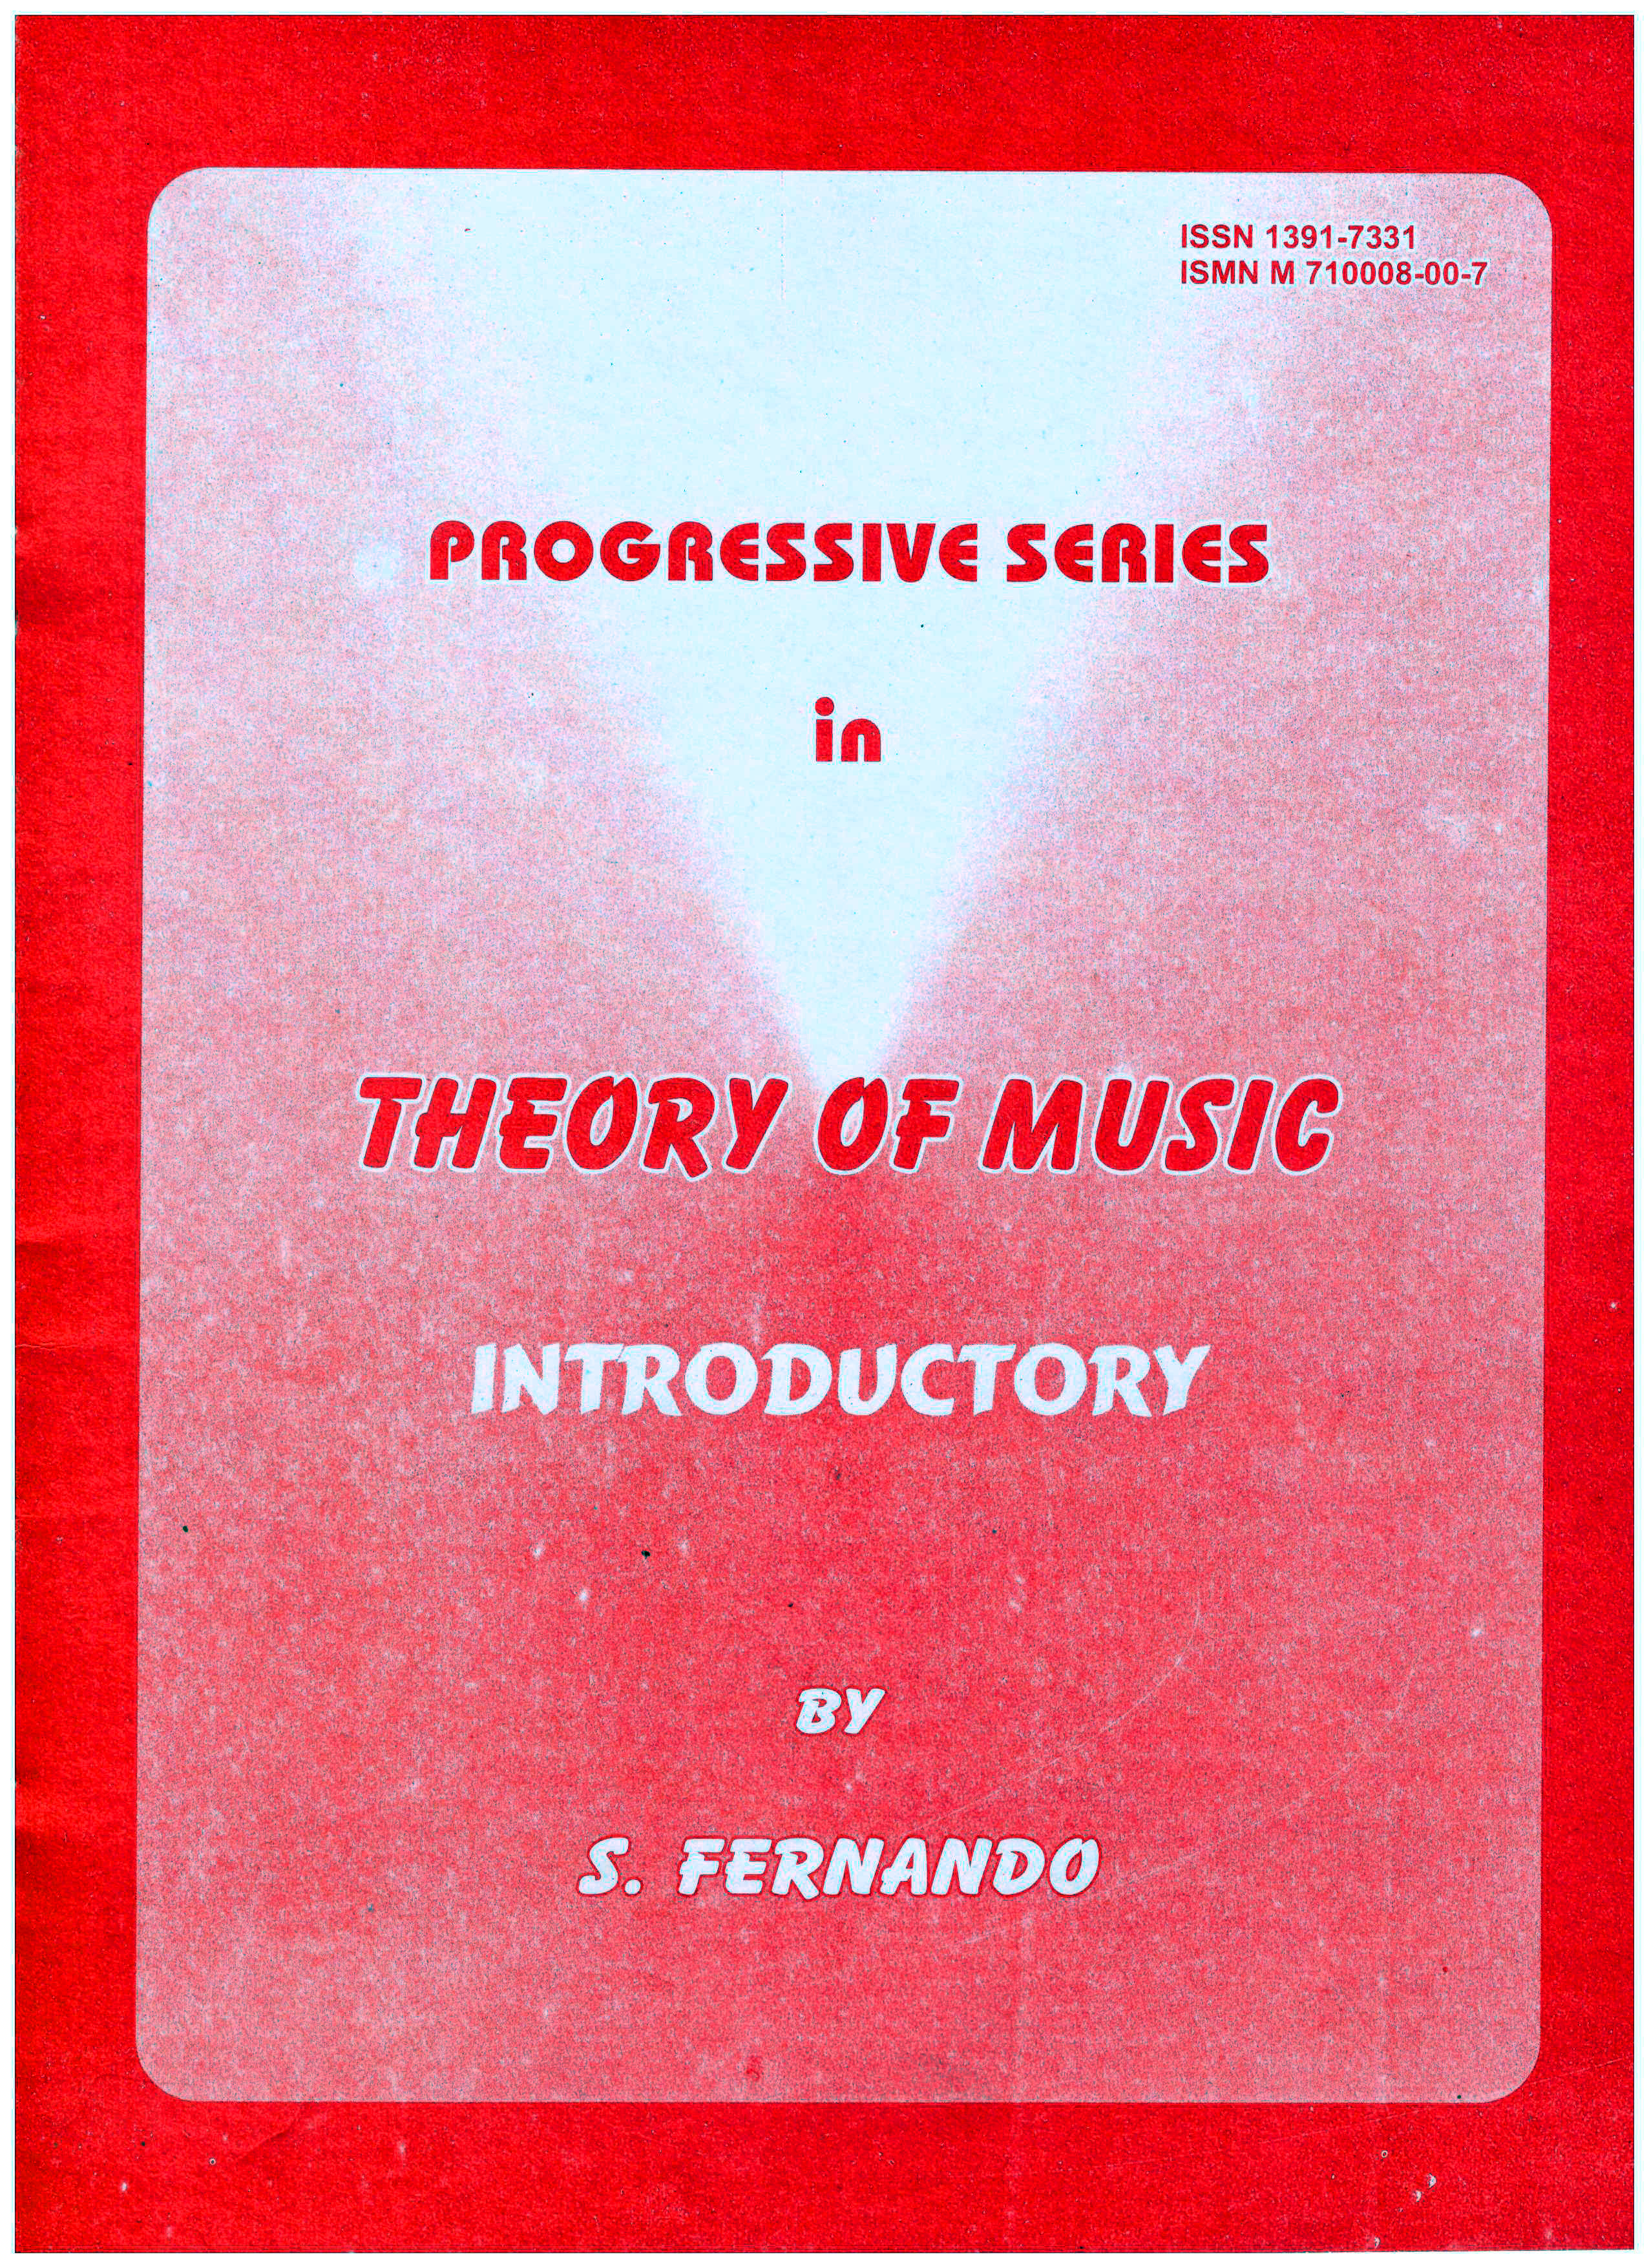 Progressive Series in Theory of Music Introductory